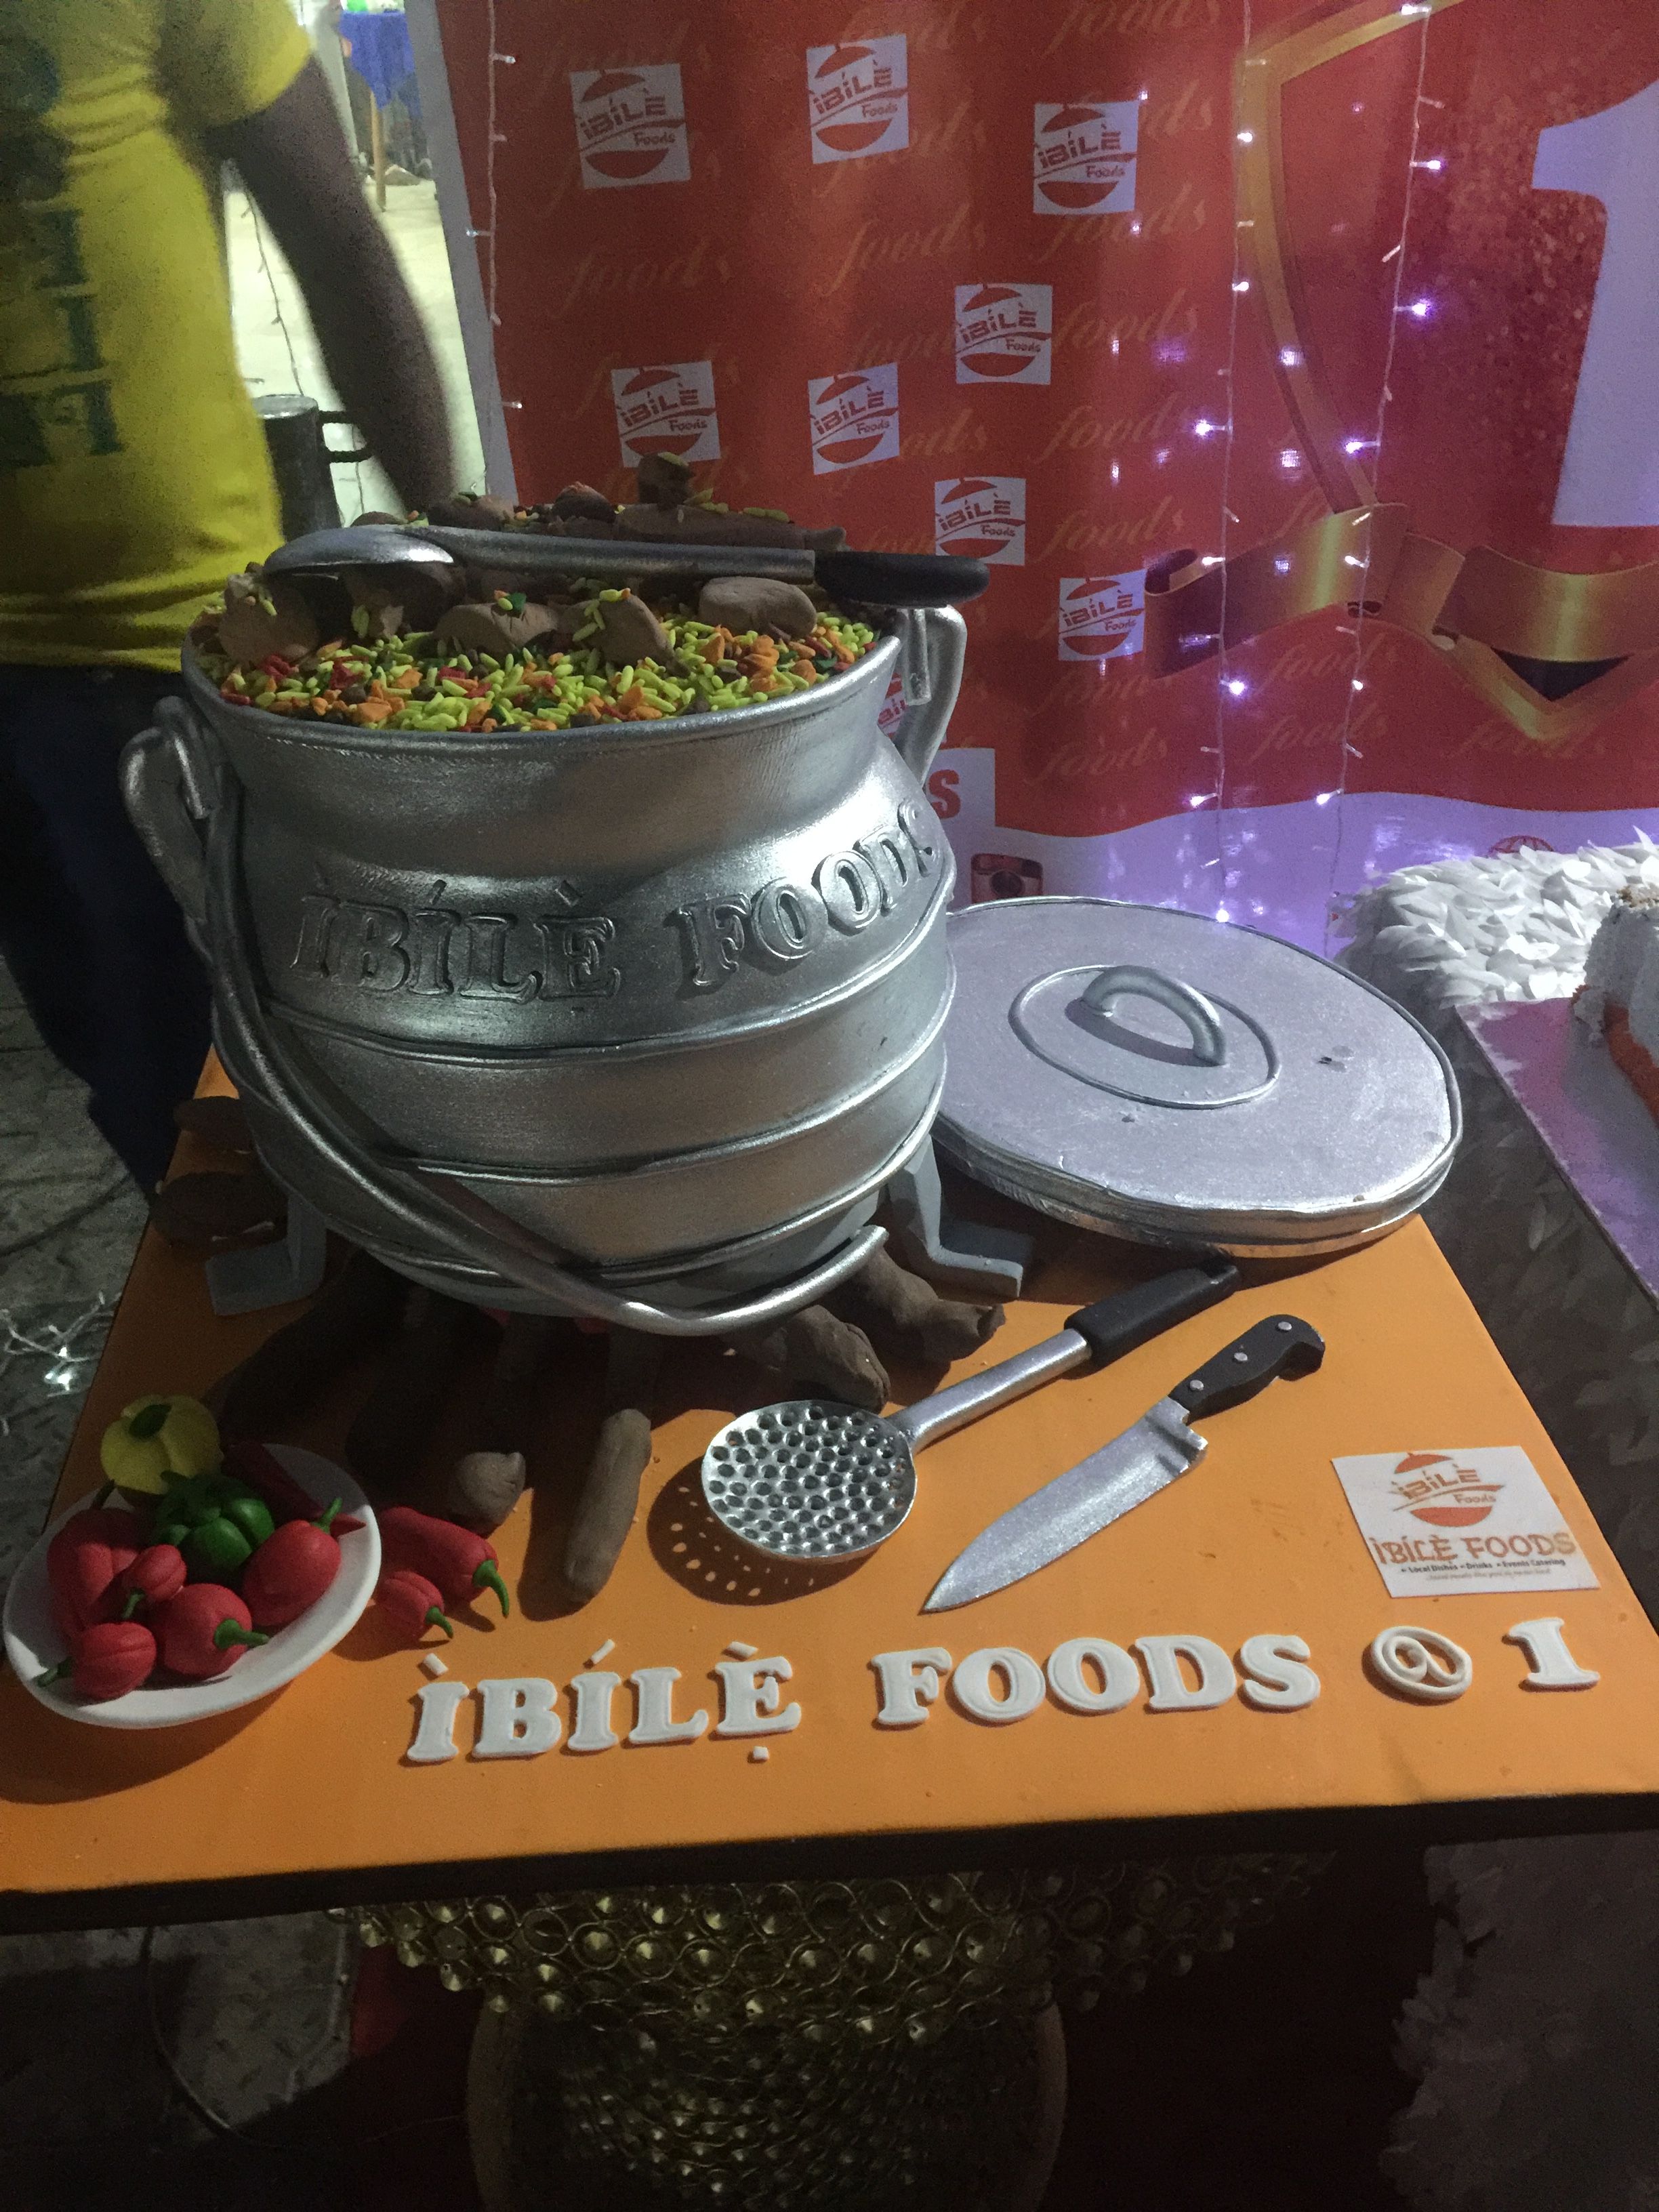 Cake of Ibile foods at 1